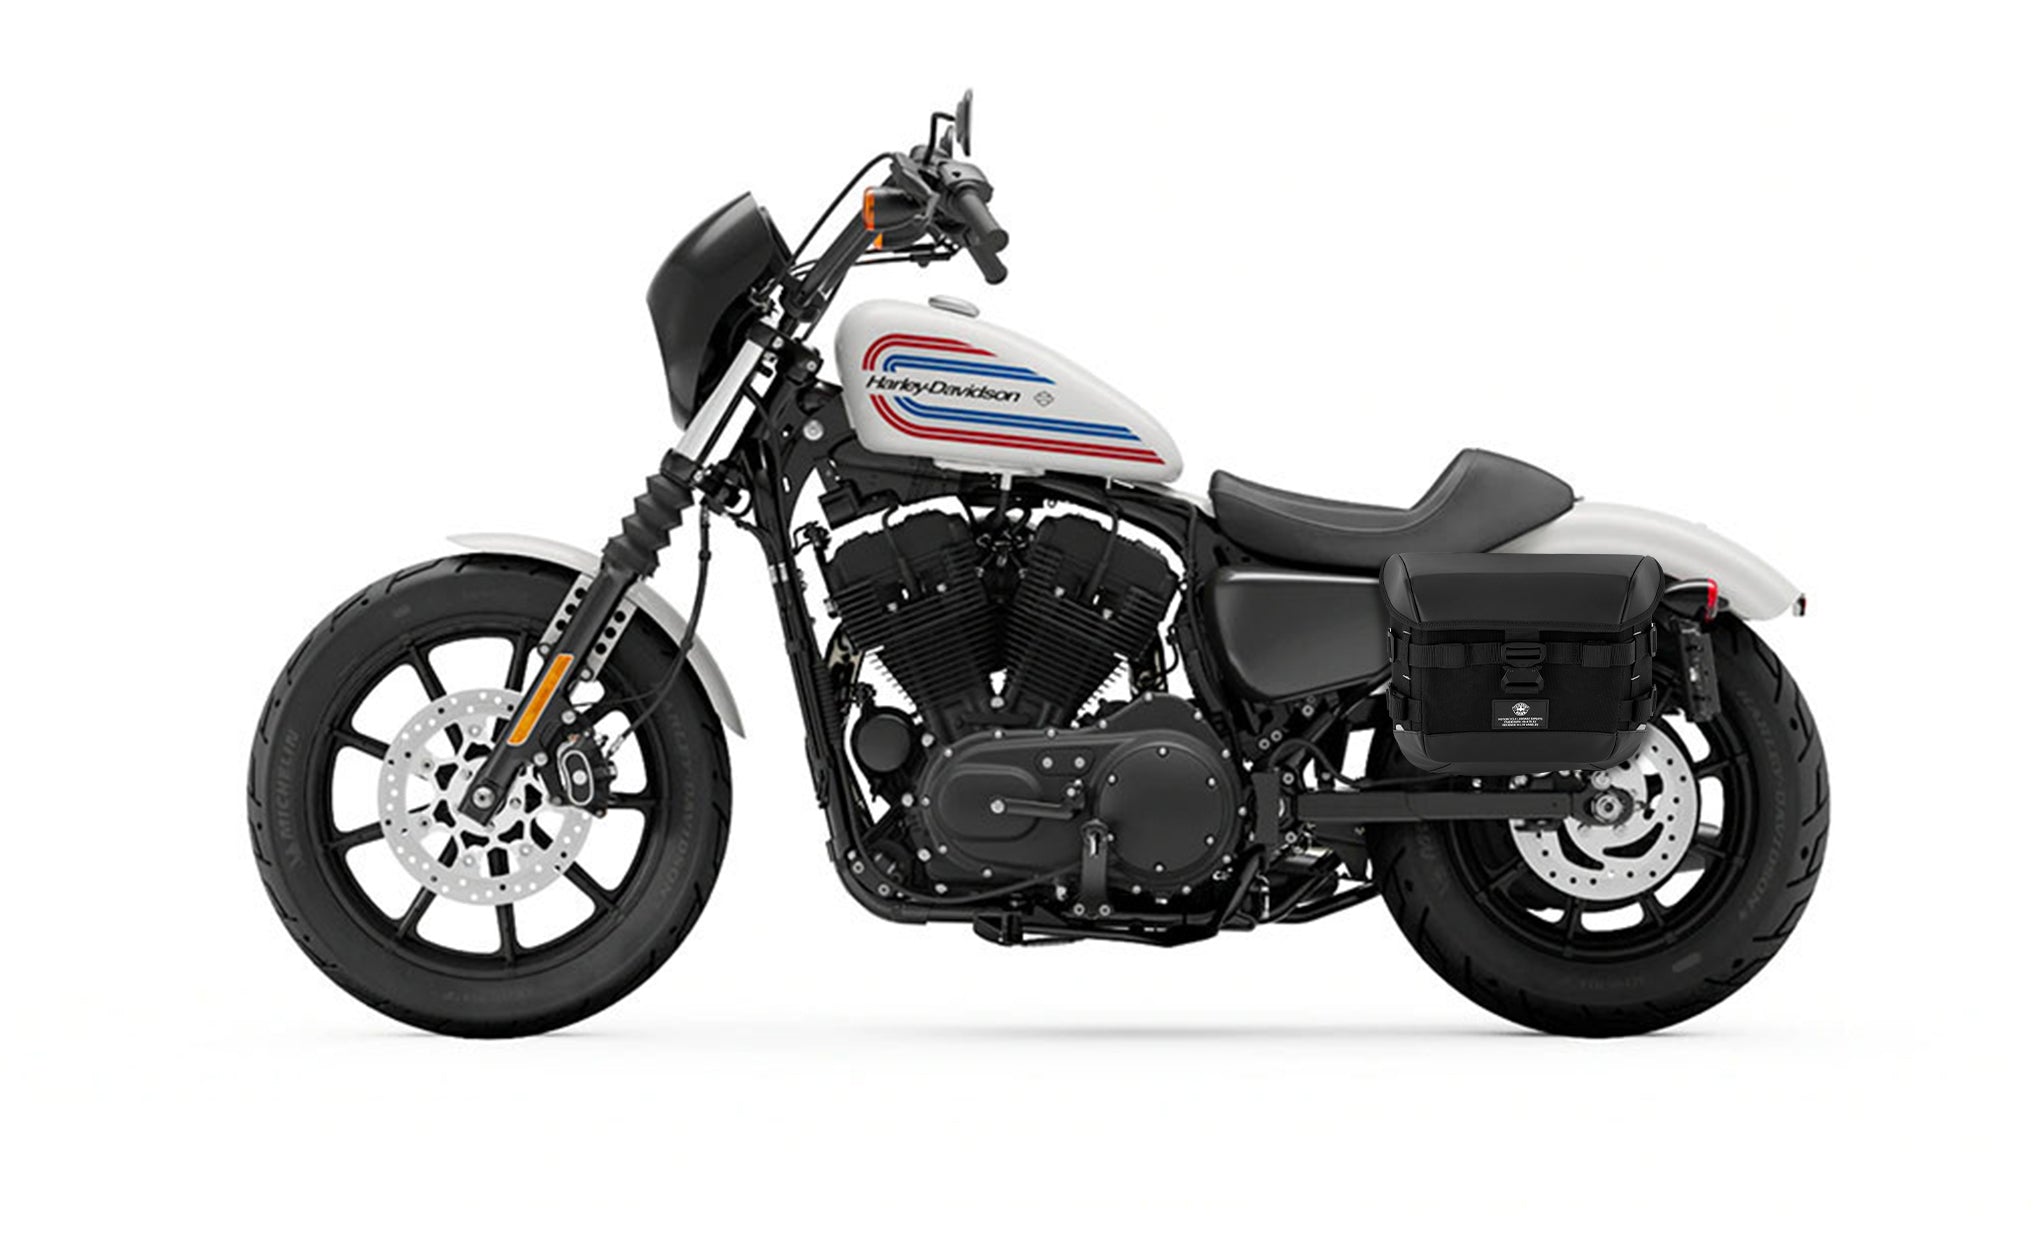 Viking Incognito Detachable Xs Solo Motorcycle Saddlebag For Harley Sportster 1200 Iron Xl1200Ns on Bike Photo @expand